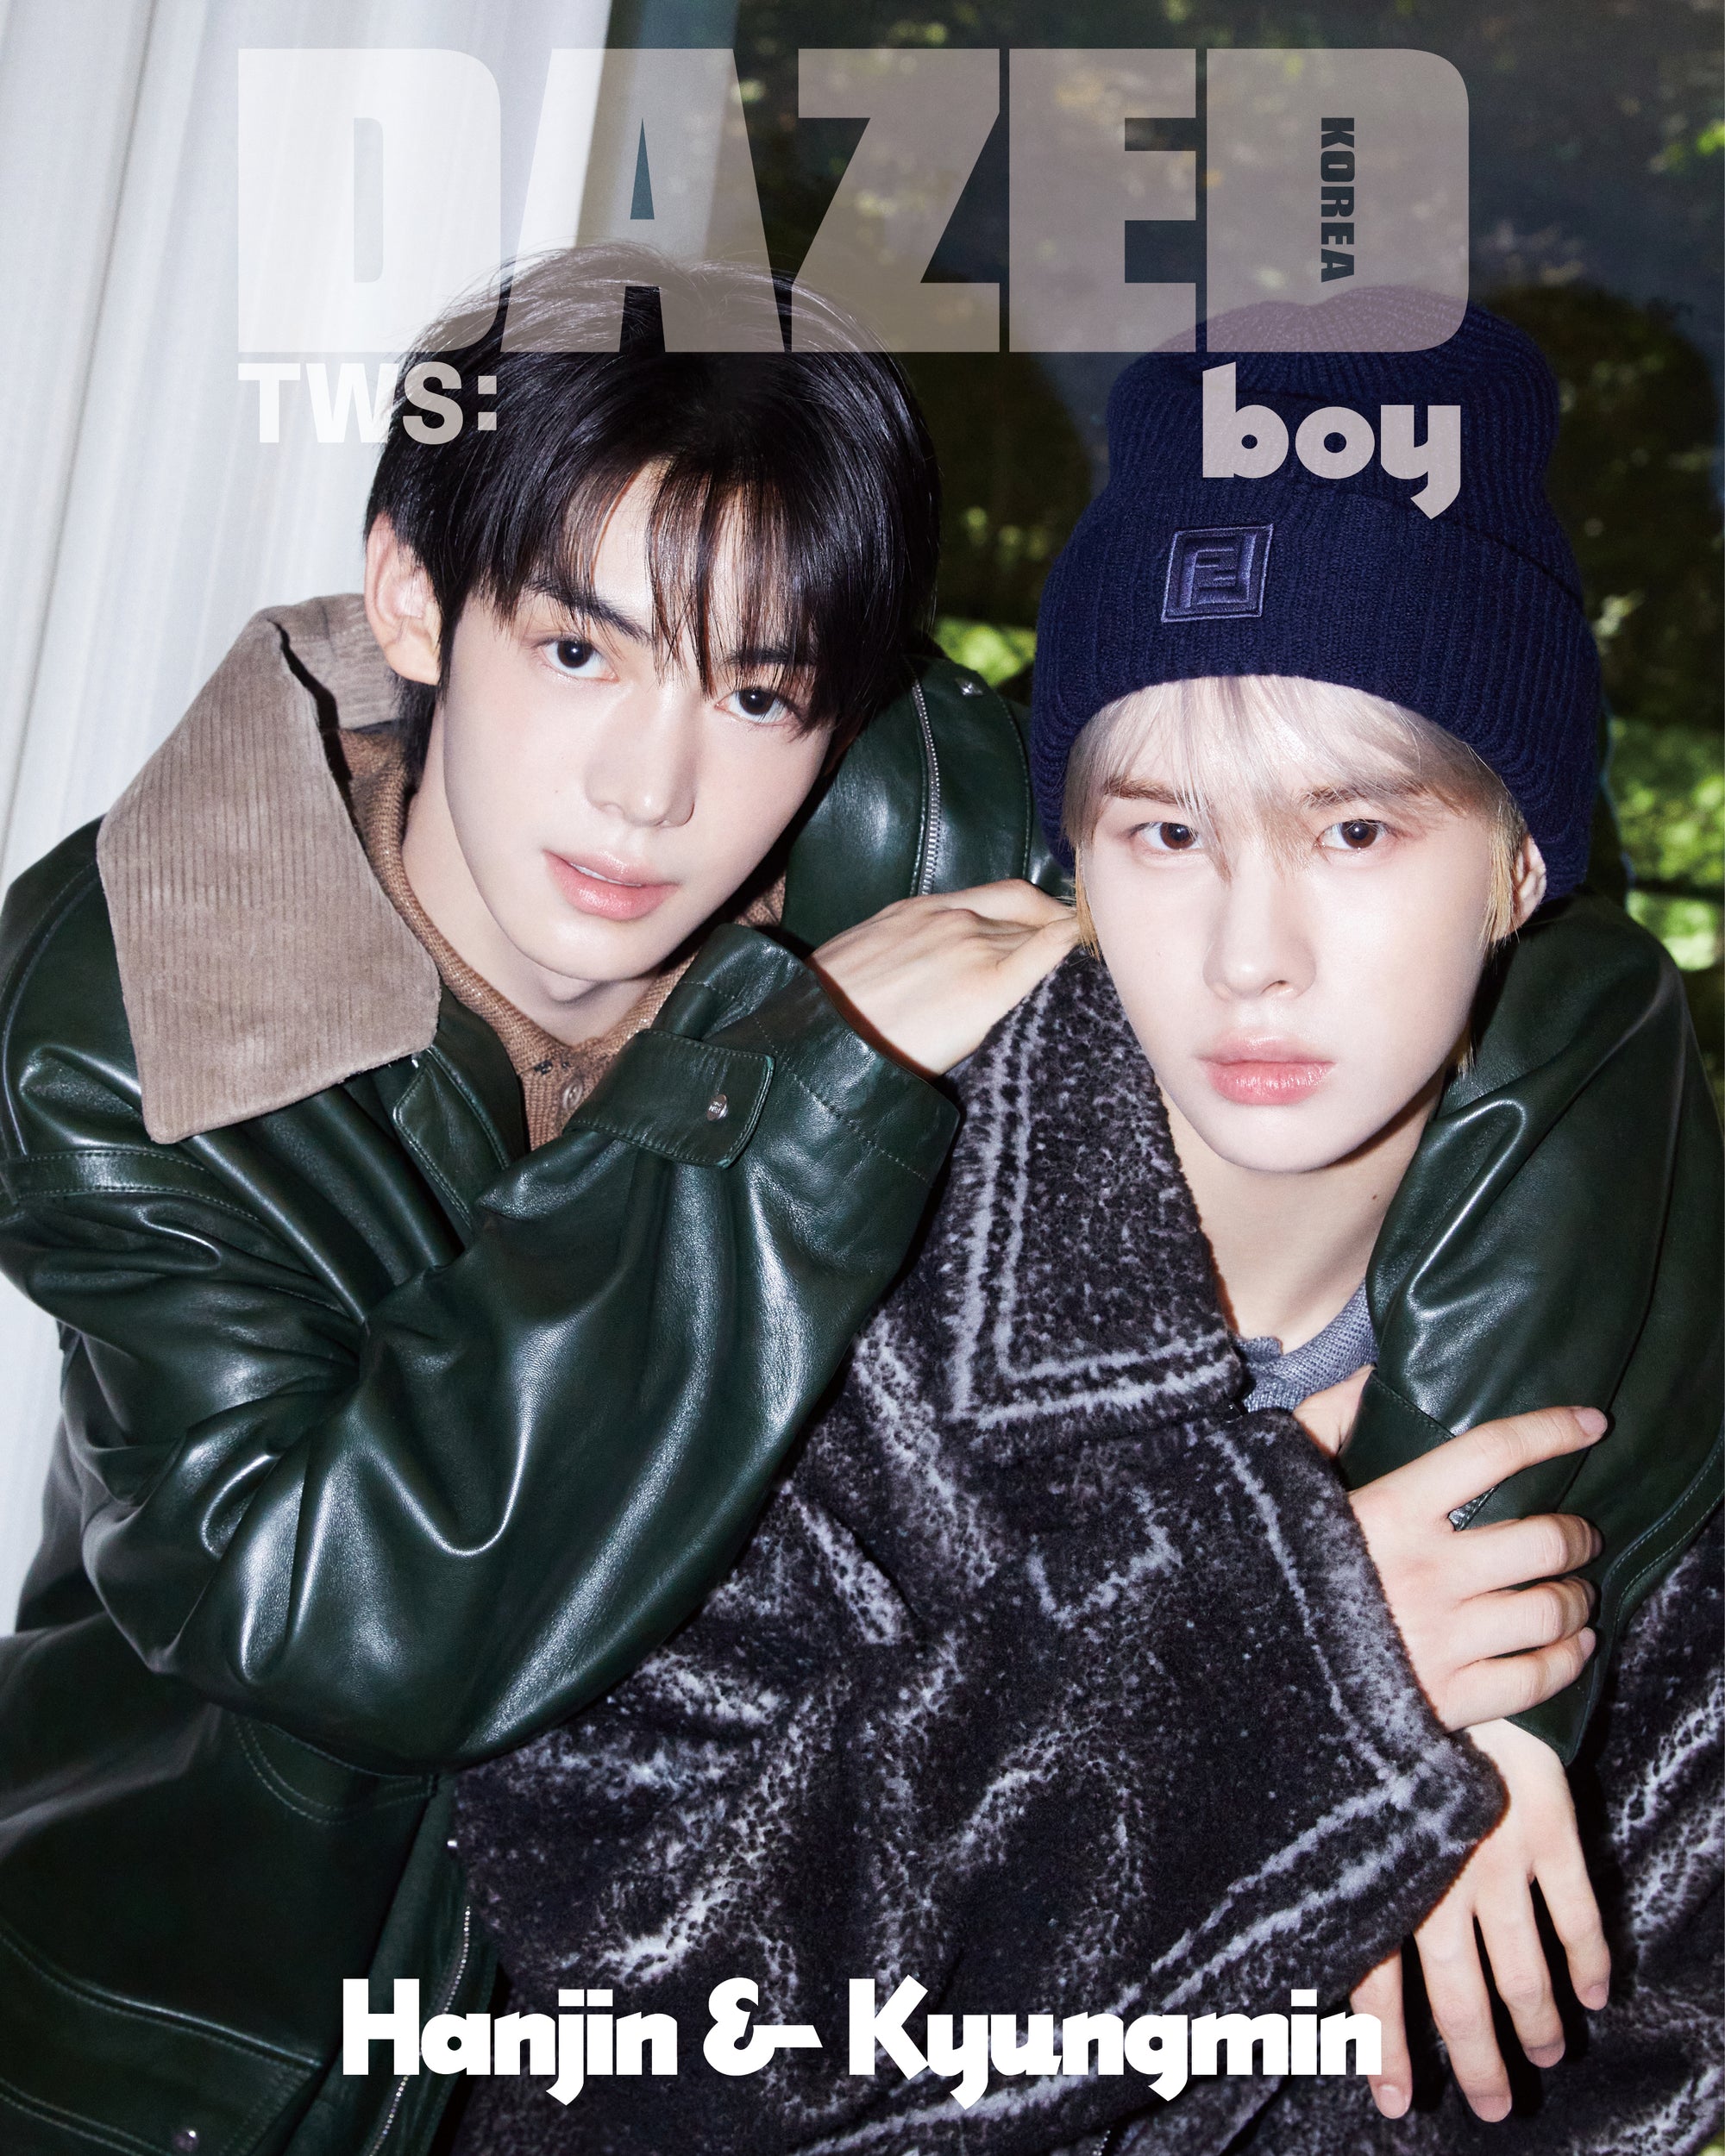 TWS - DAZED & CONFUSED BOY EDITION HANJIN & KYUNGMIN COVER